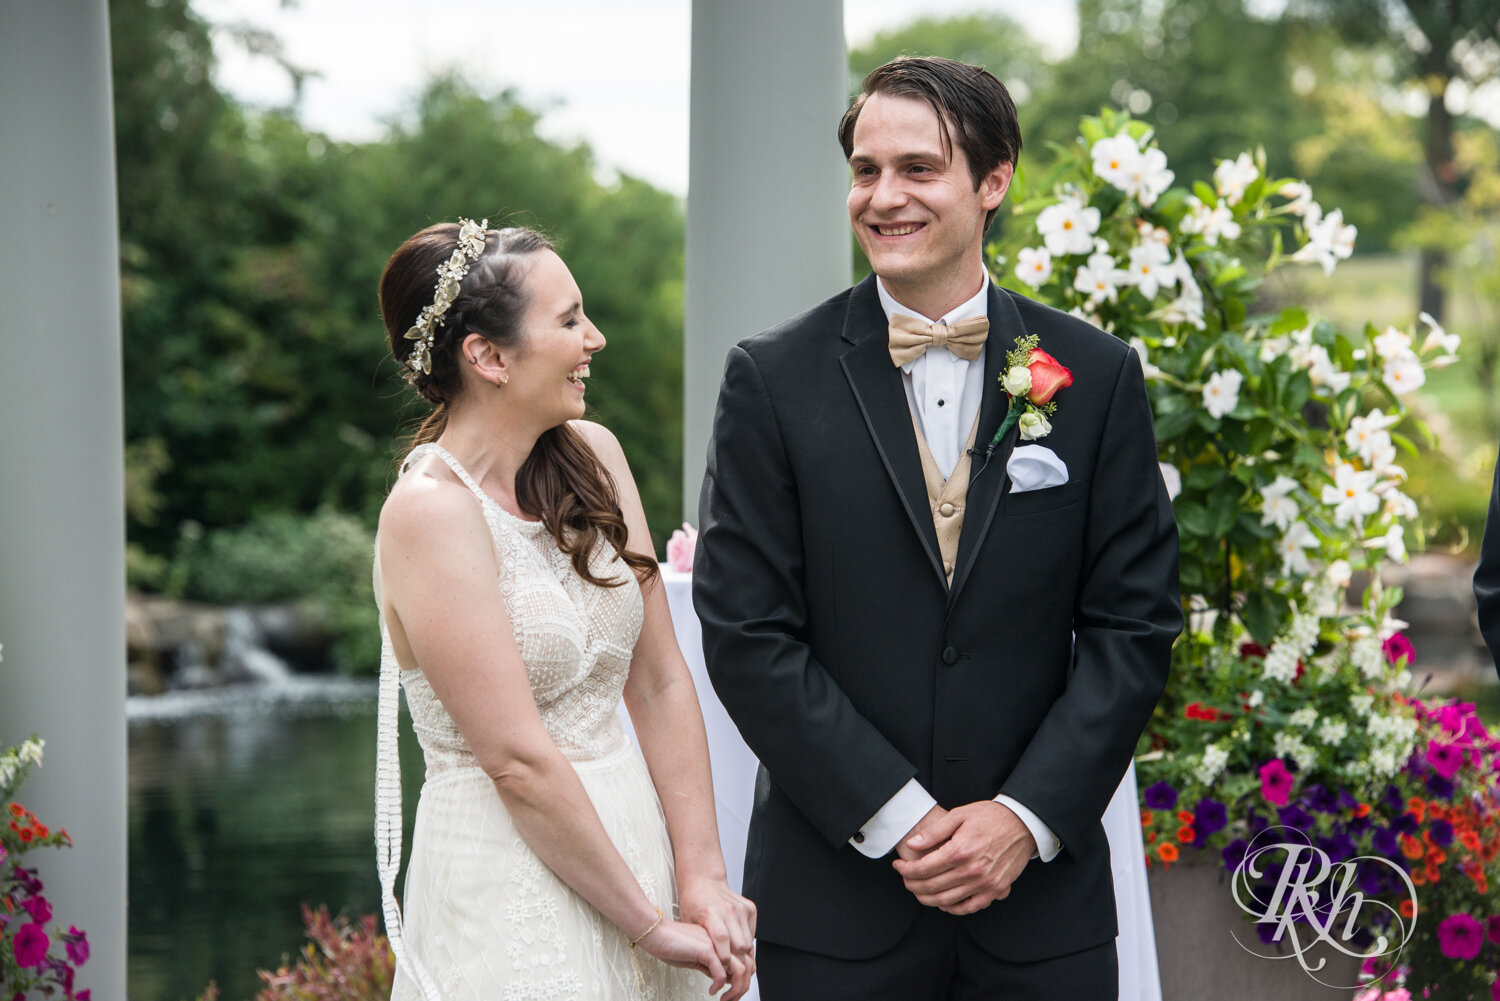 Bride and groom laugh during wedding ceremony at Olympic Hills Golf Club in Eden Prairie, Minnesota.